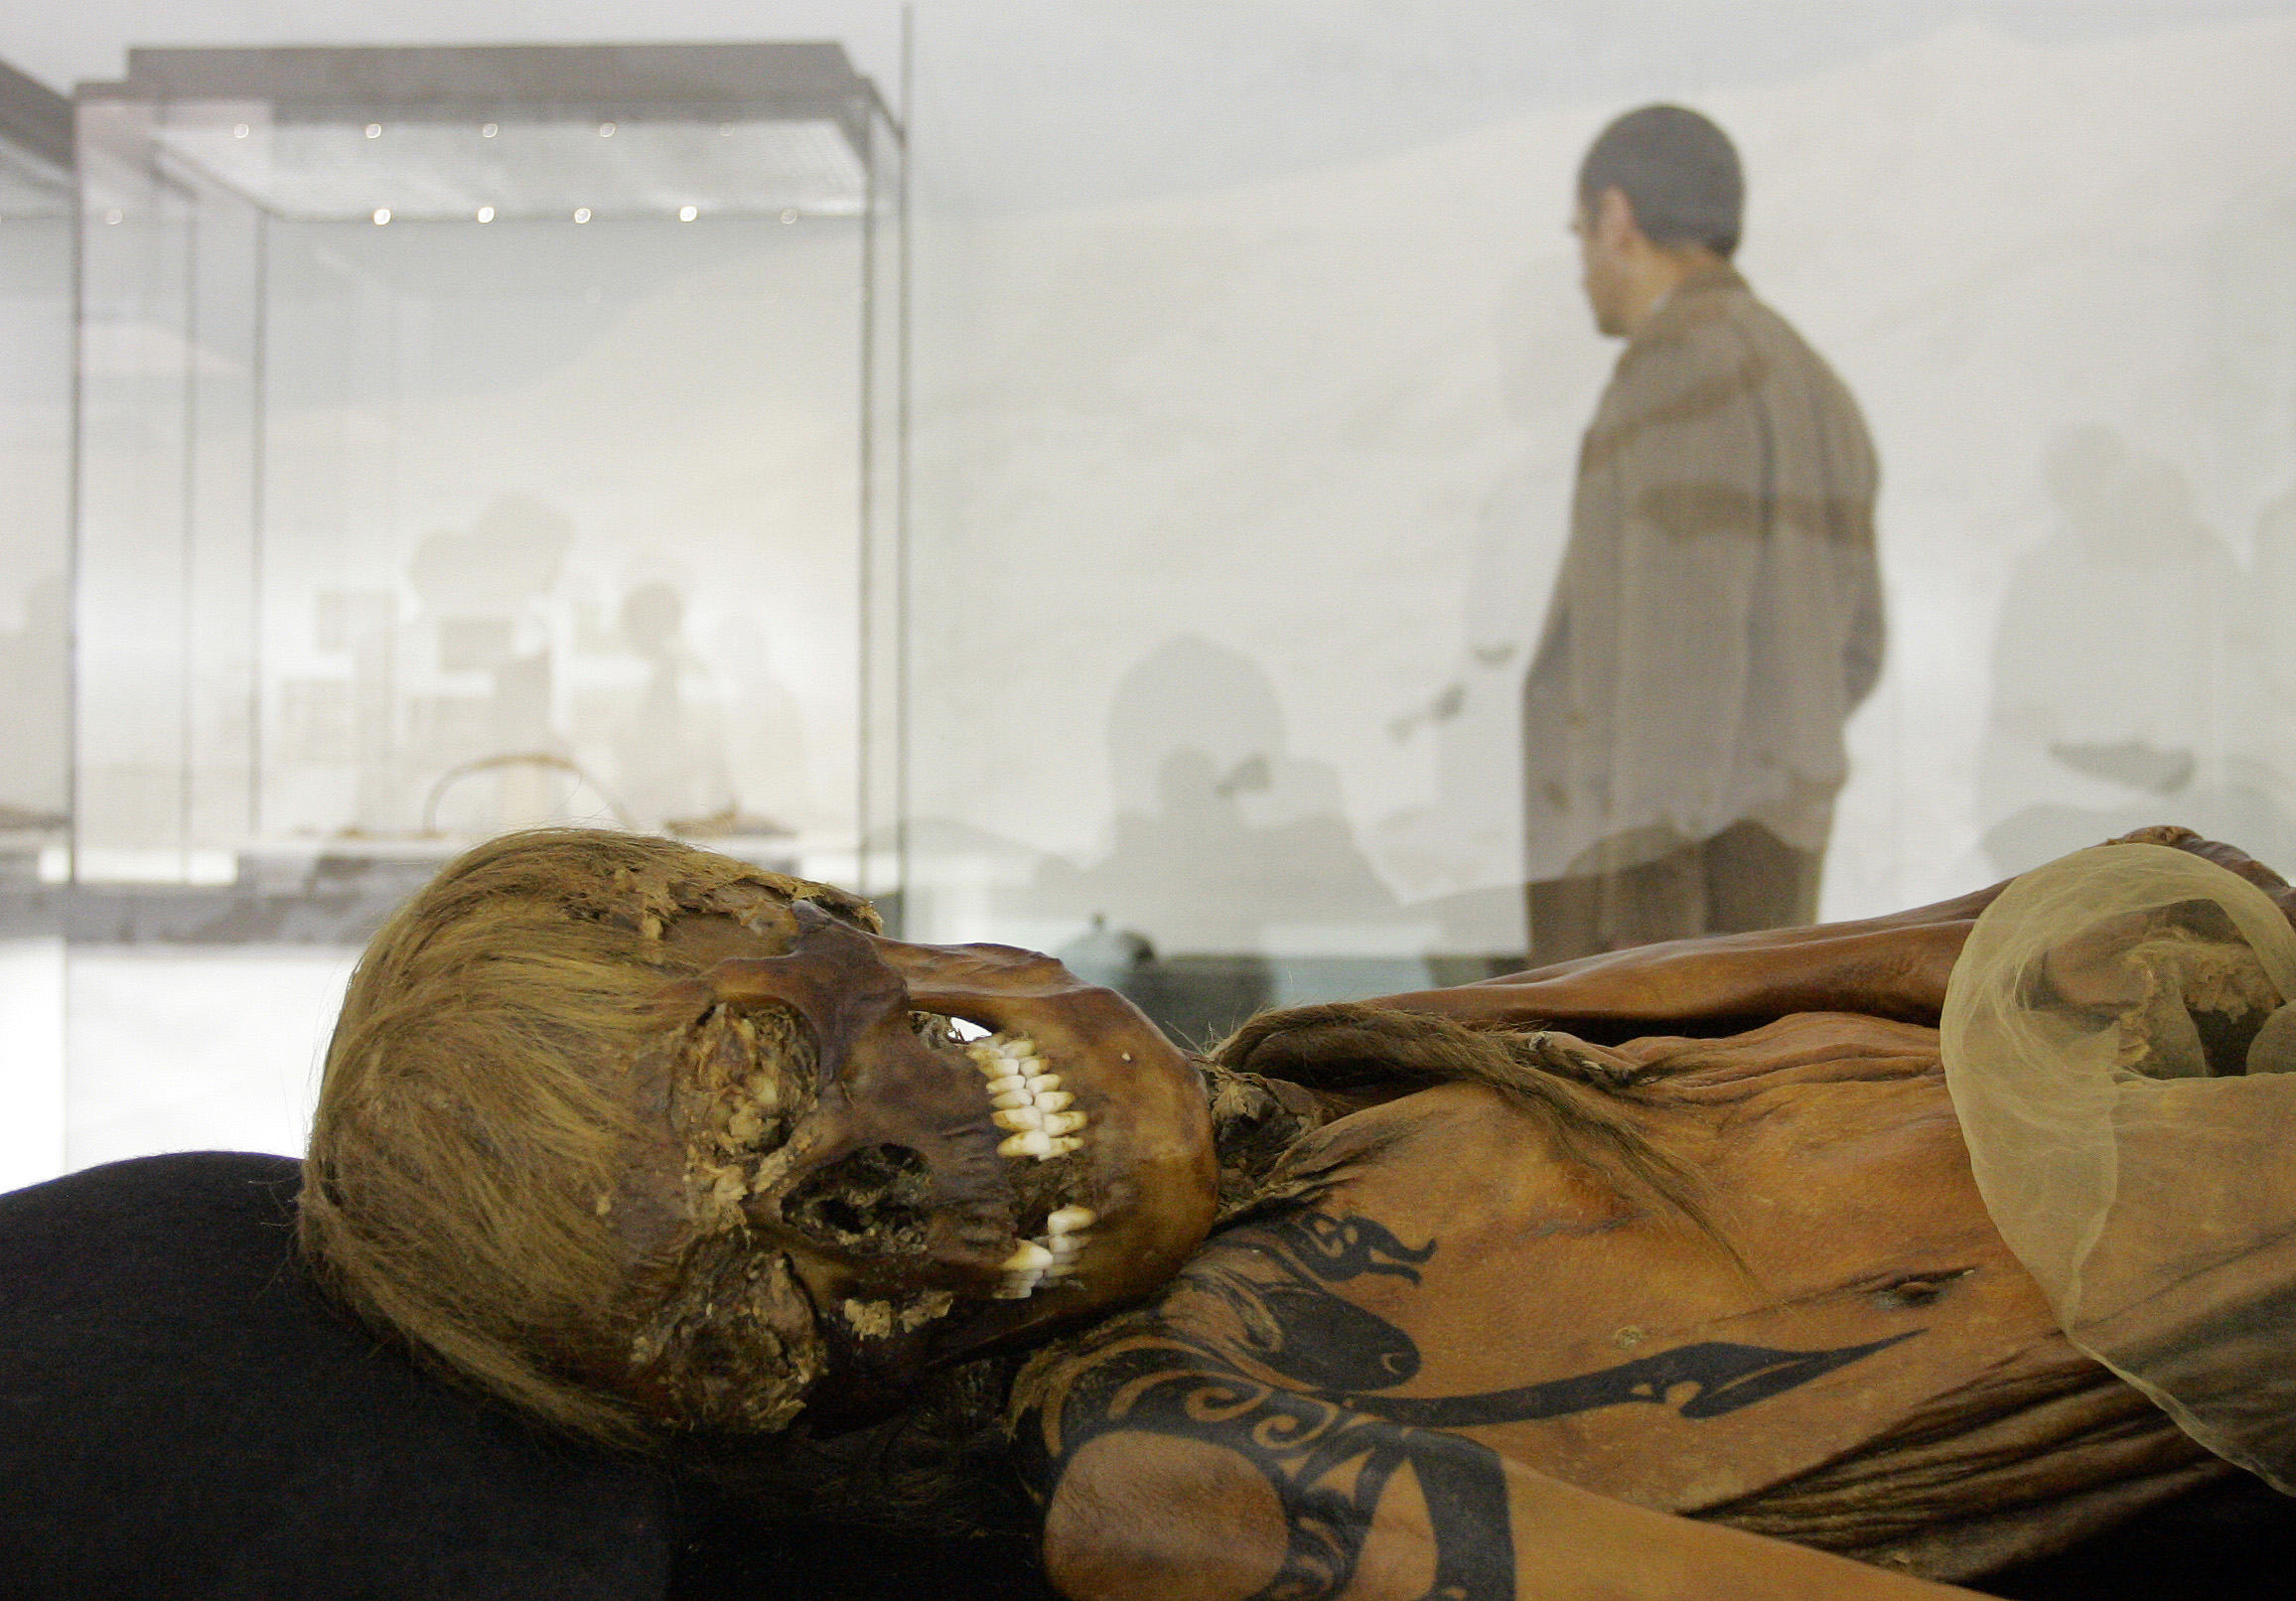 Soviet Bombers And Scythian Mummies: The Archaeology Uncovered By Climate Change